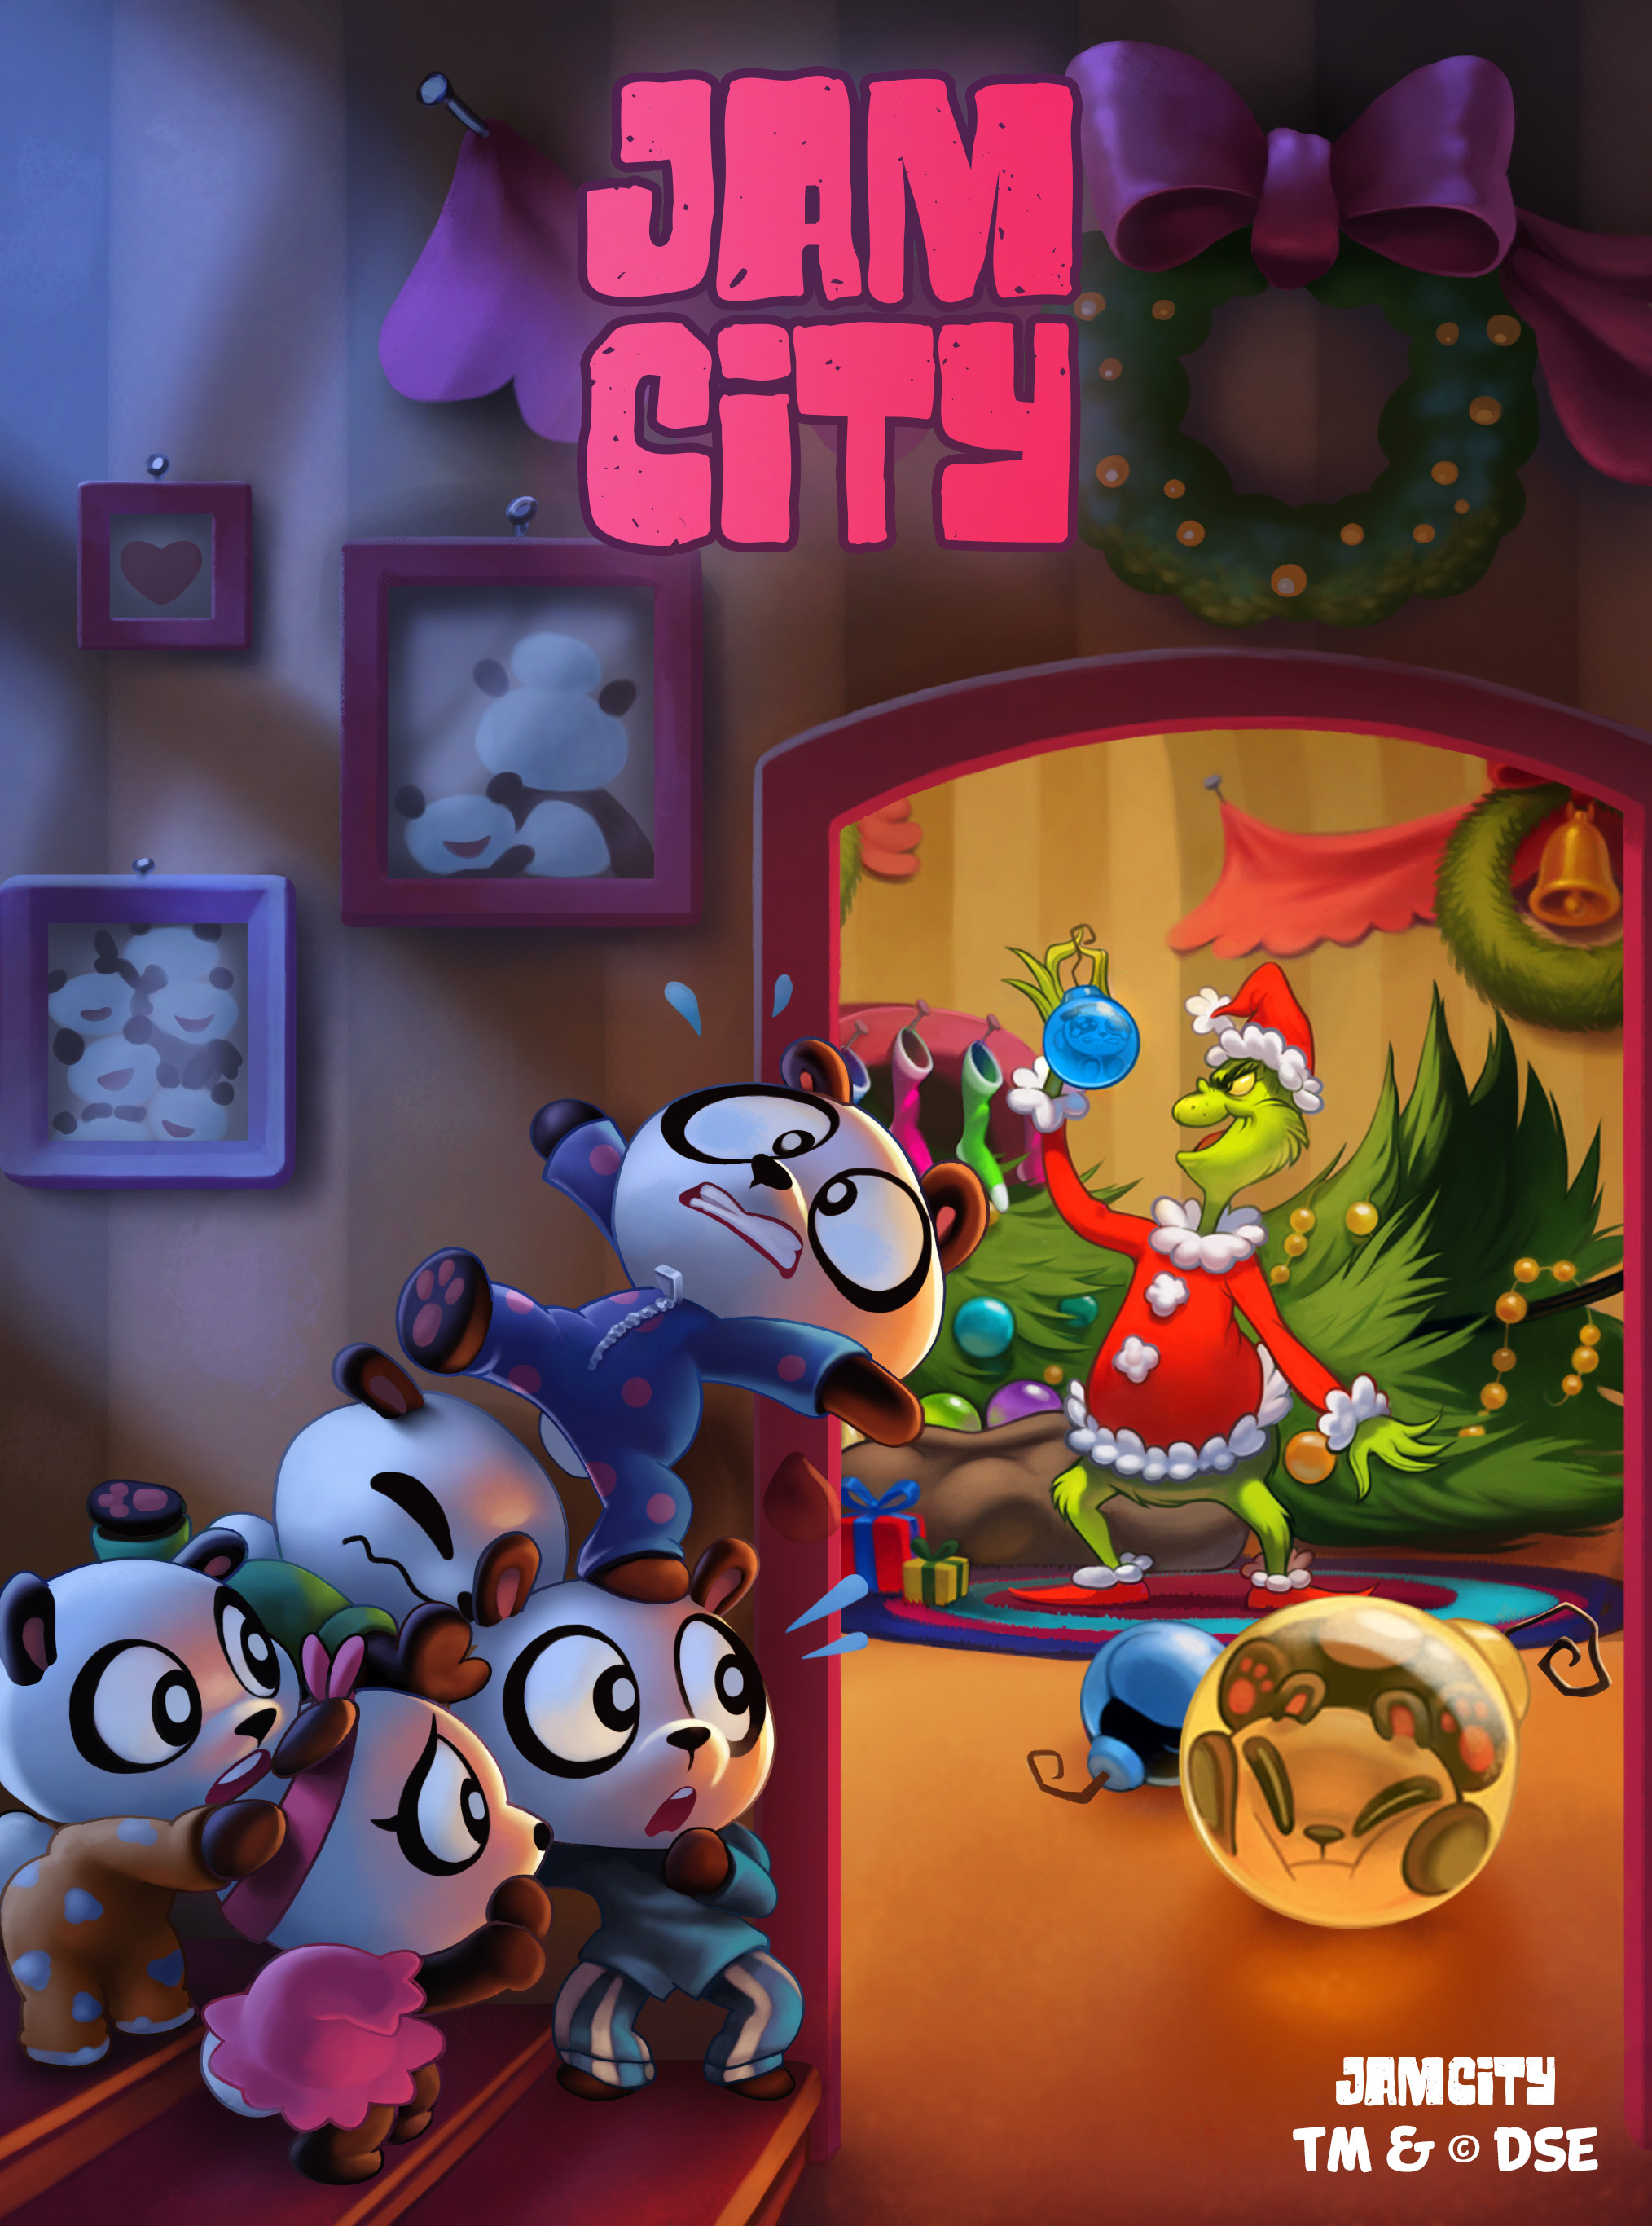 doolhof Voorzichtigheid vlotter Iconic Holiday Curmudgeon Returns to Mobile in Jam City's Panda Pop  “Grinchmas” Takeover | Business Wire